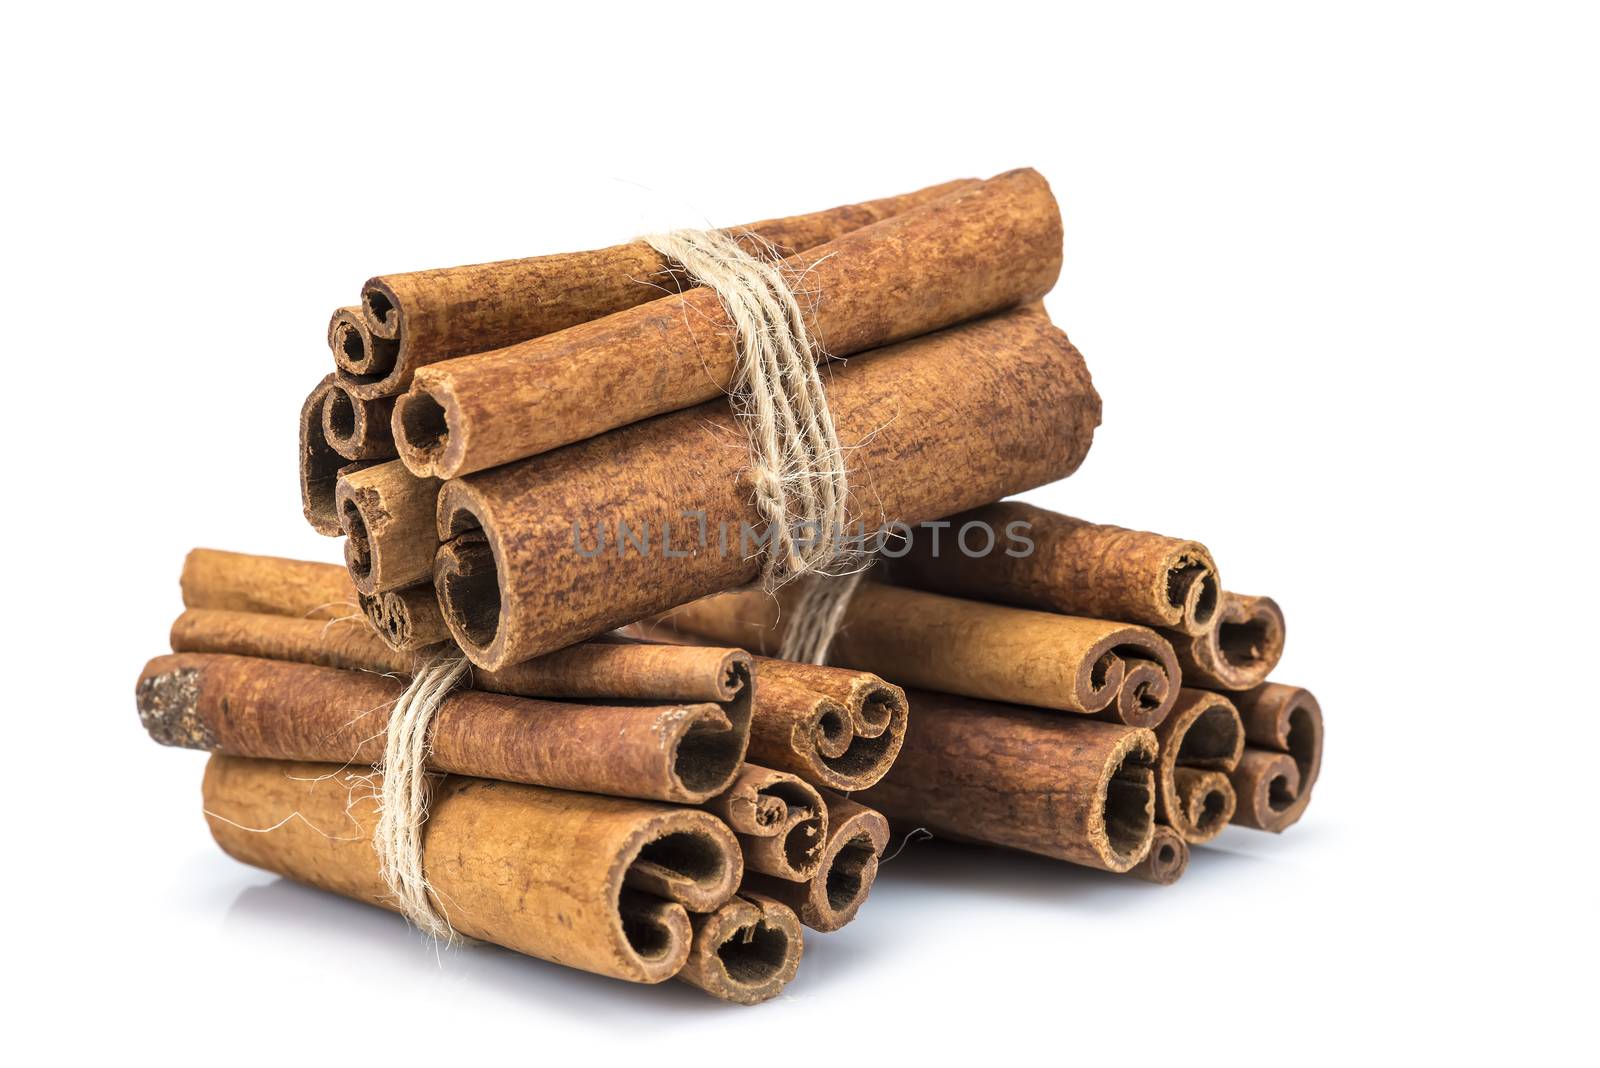 Bunches of cinnamon sticks by angelsimon